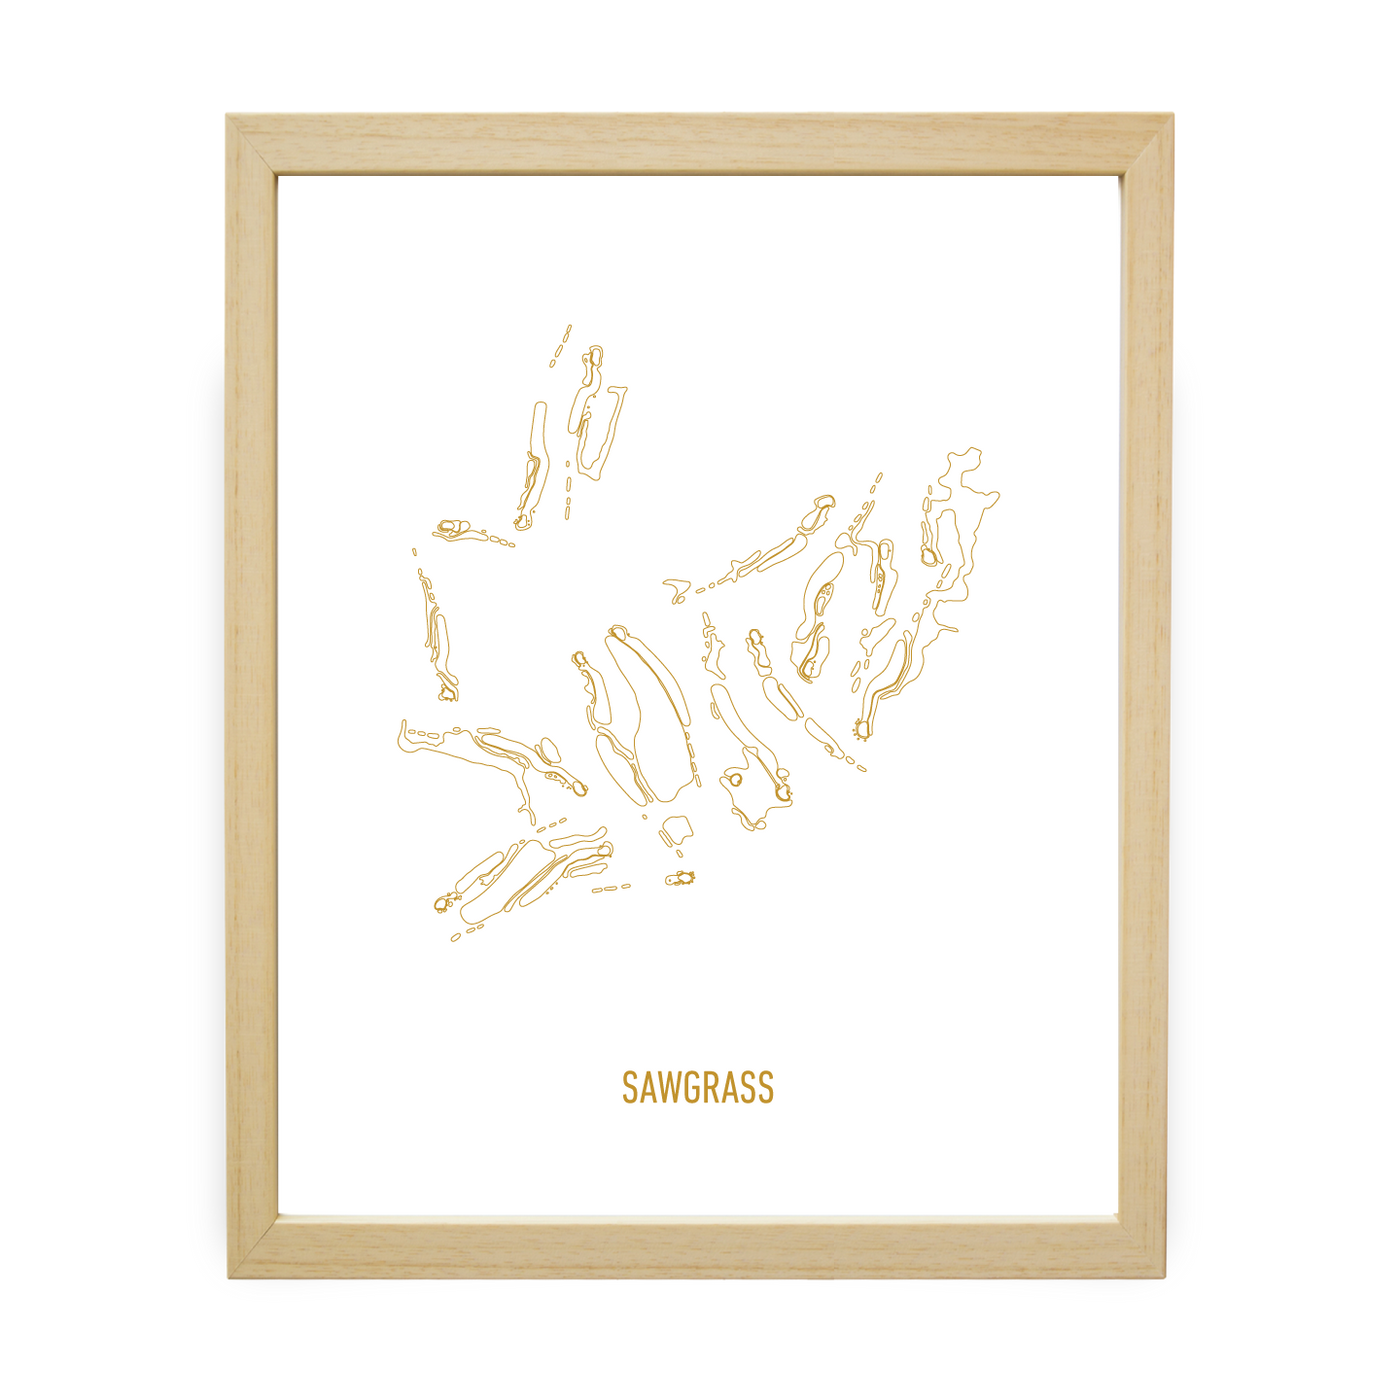 Sawgrass (Gold Collection)